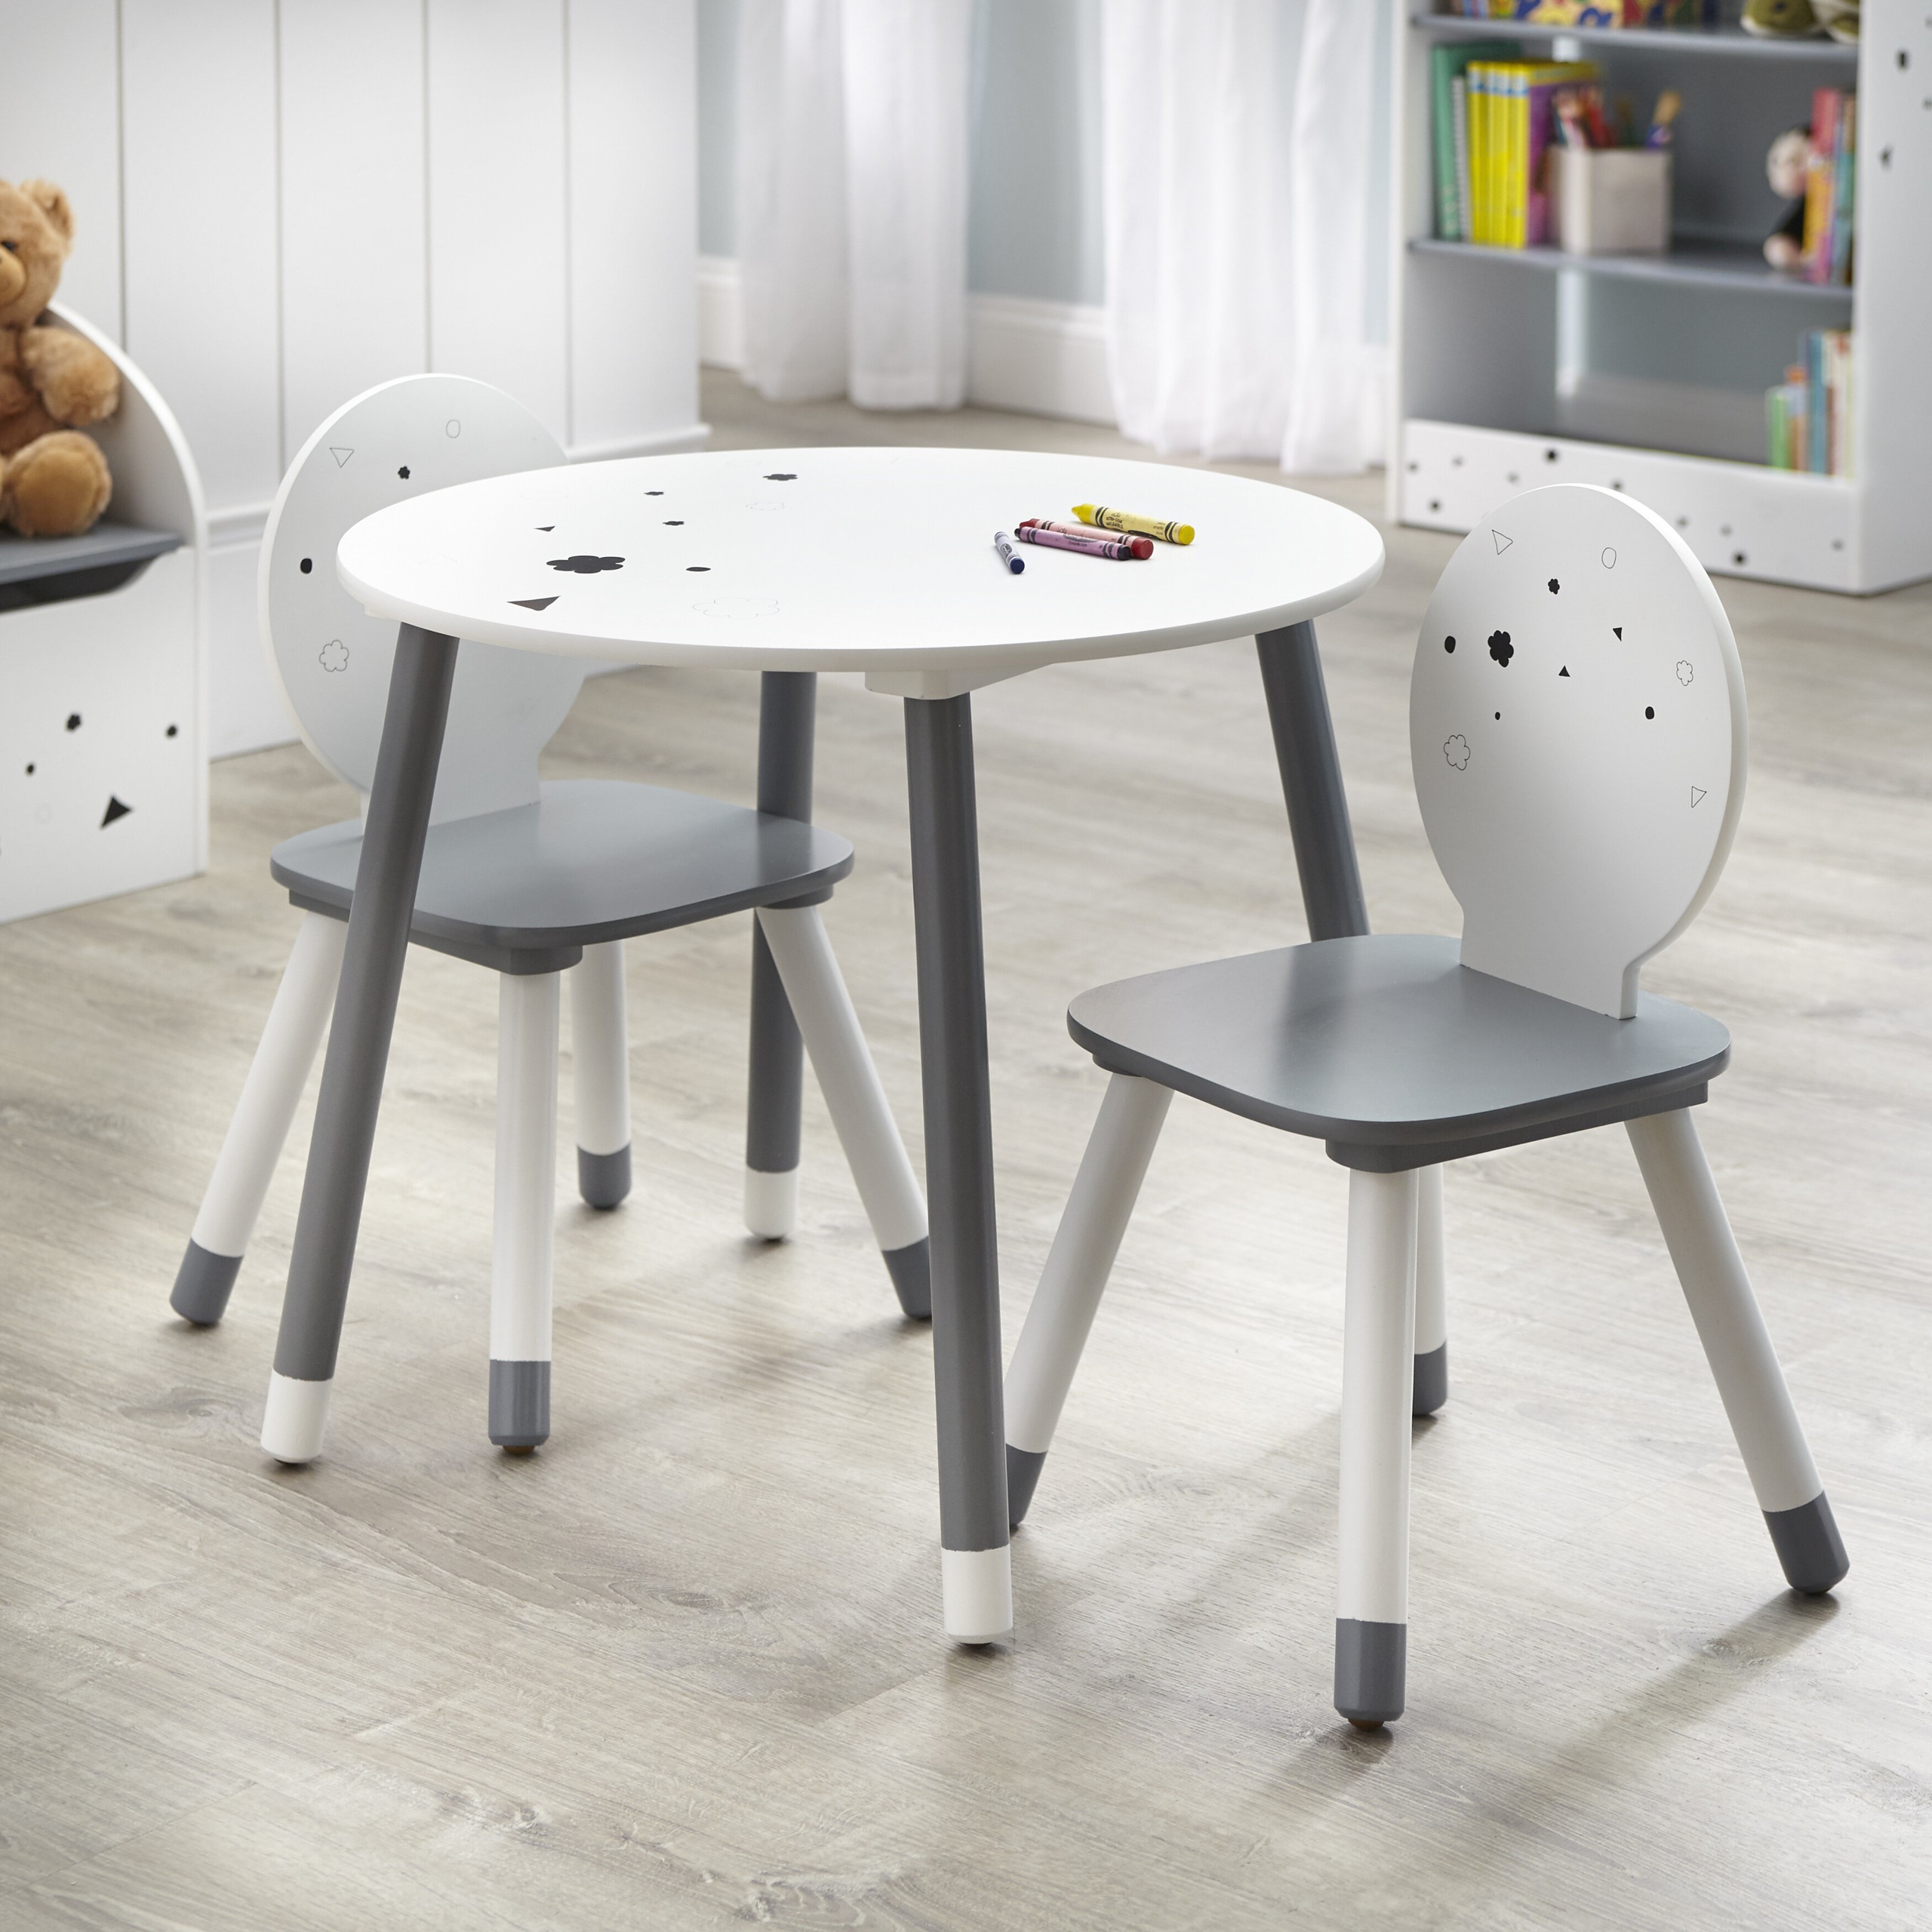 Camborne Kids 3 Piece Writing Table and Chair Set